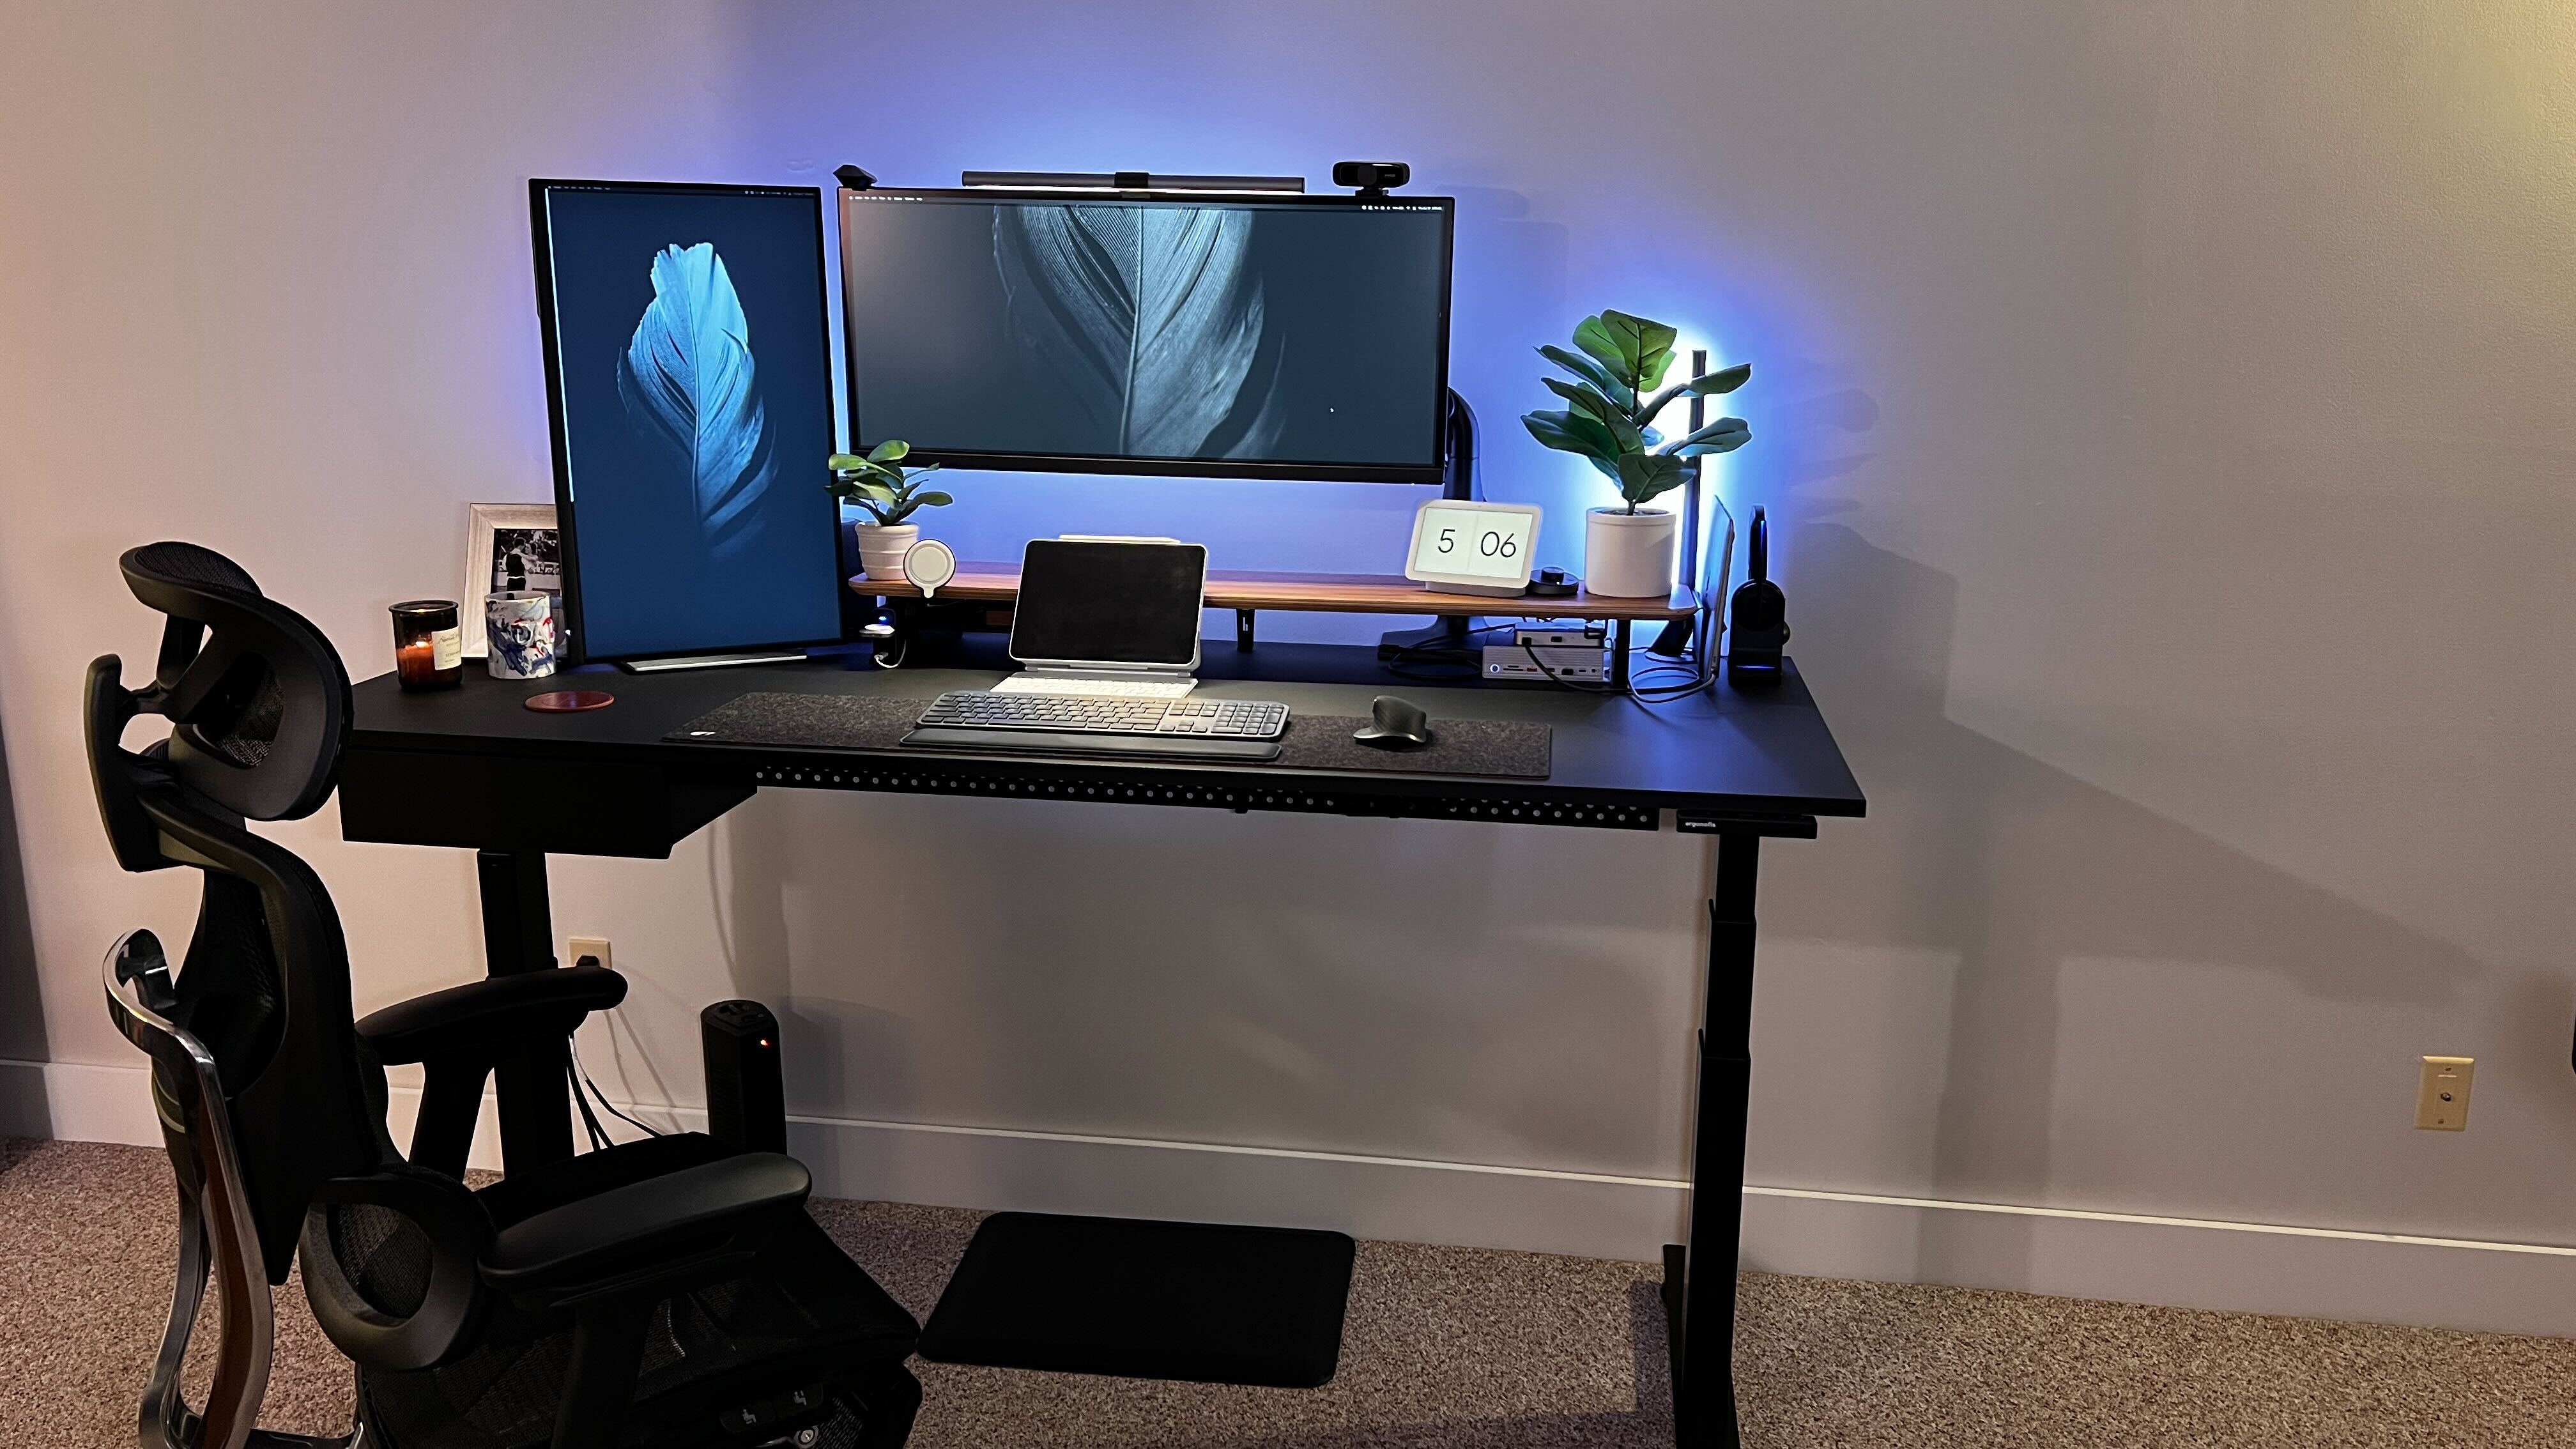 Review: Does FlexiSpot E7 Pro Plus standing desk rise to the occasion?